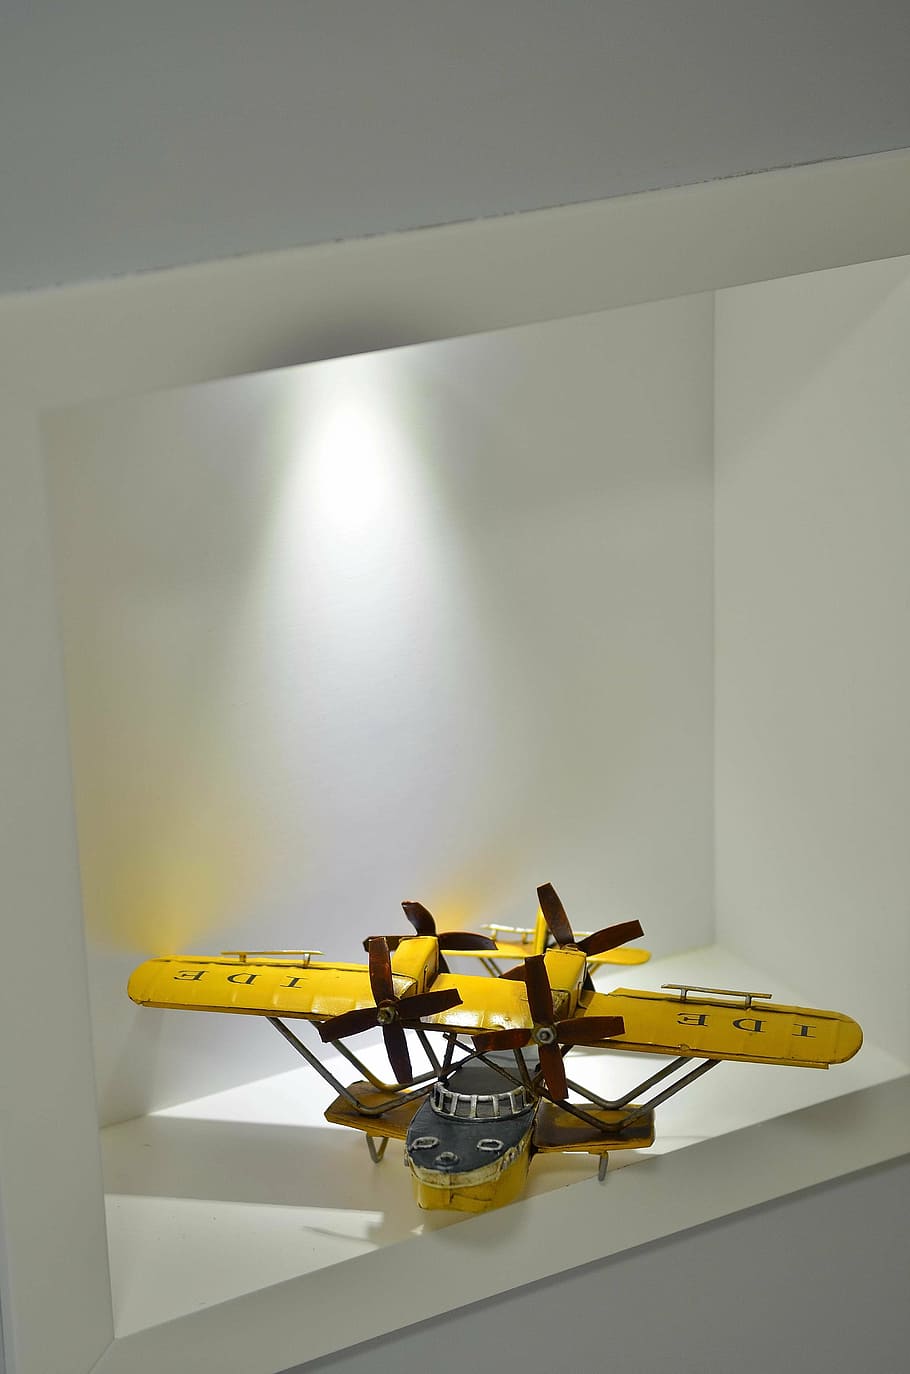 niche, lighting, plane, decoration, yellow, indoors, wall - building feature, home interior, architecture, illuminated